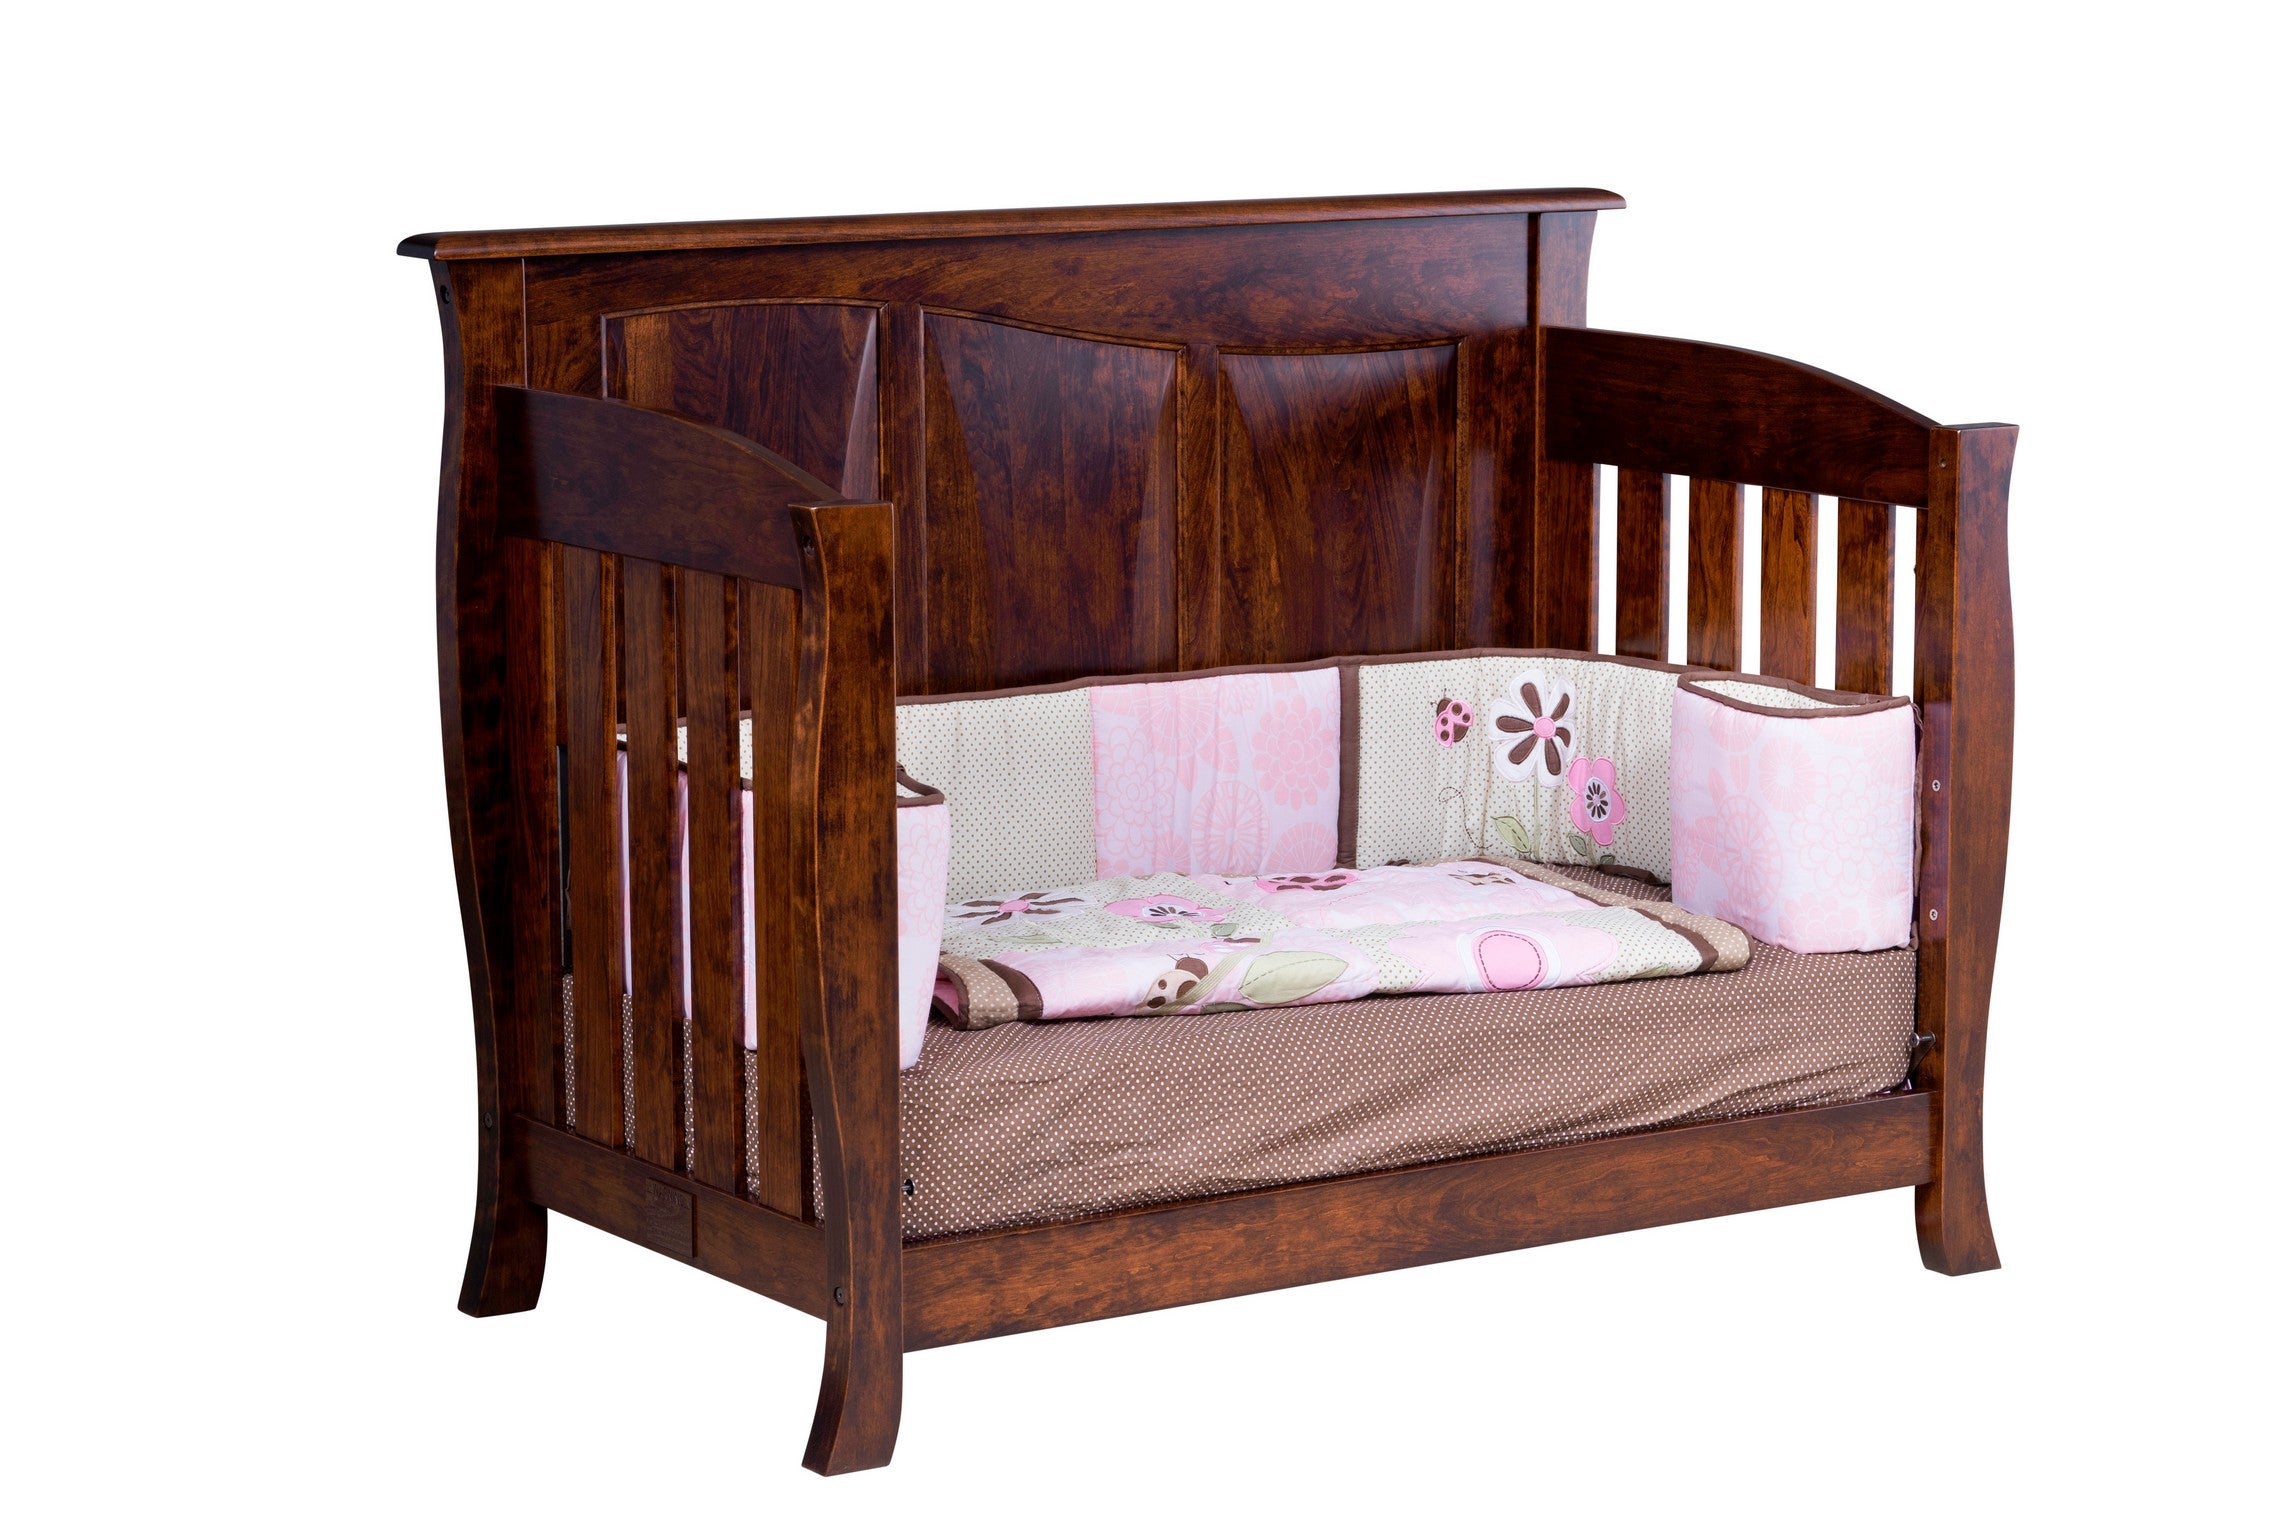 cayman toddler bed in sap cherry wood with burnt umber stain